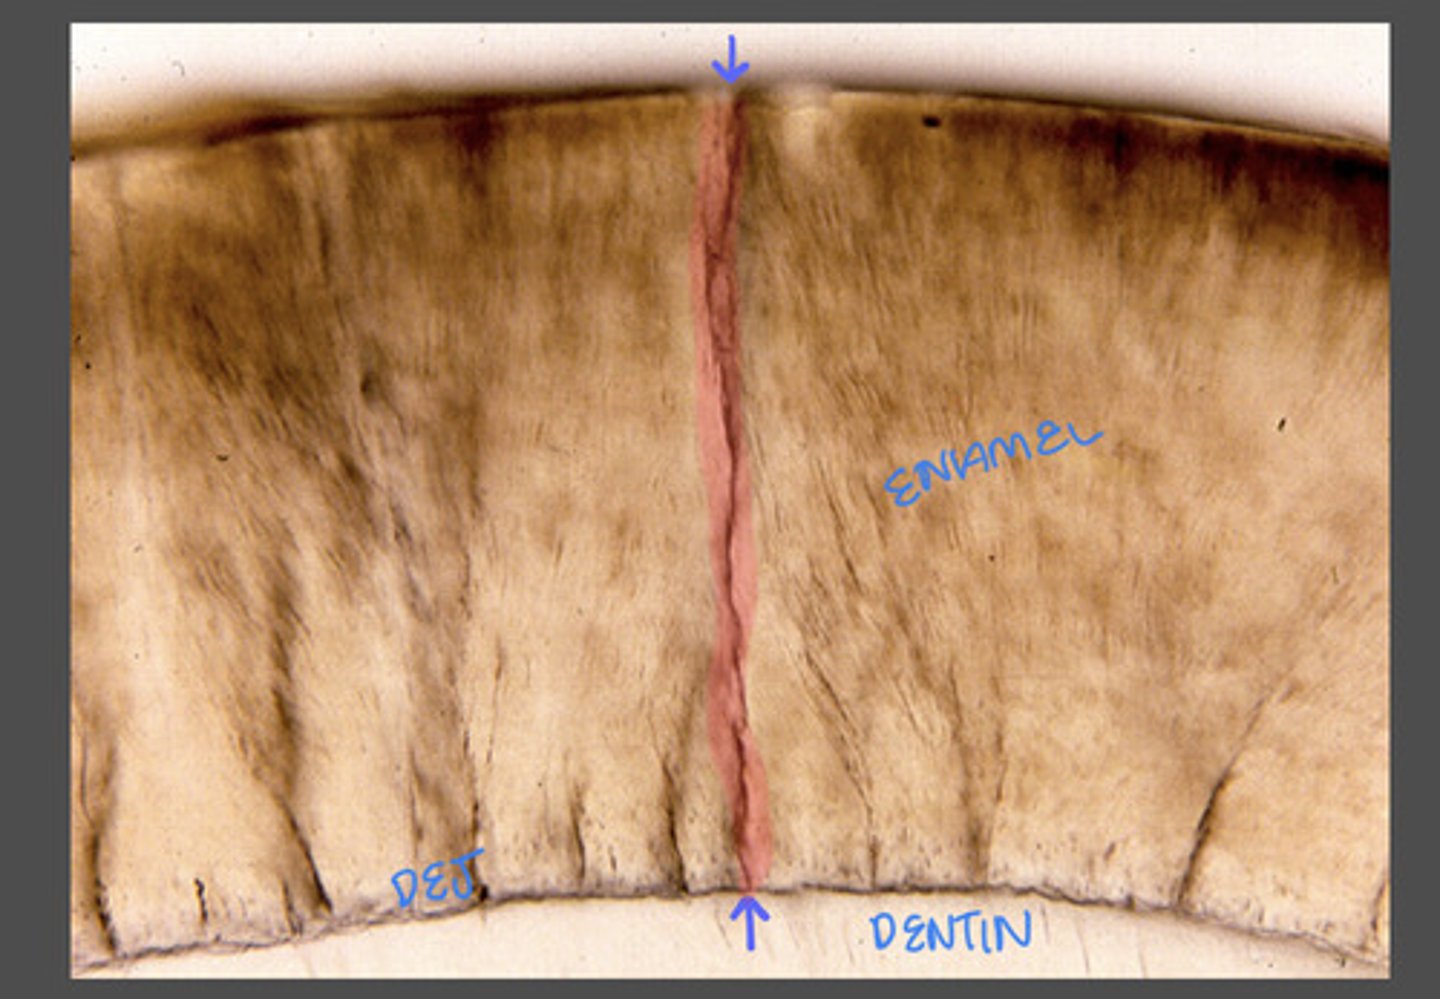 <p>Fissure-like linear enamel defects containing proteins proteoglycans, and lipids.</p><p>Enamel lamellae extends along the longitudinal axis of the tooth perpendicular to the dentin enamel junction.</p>